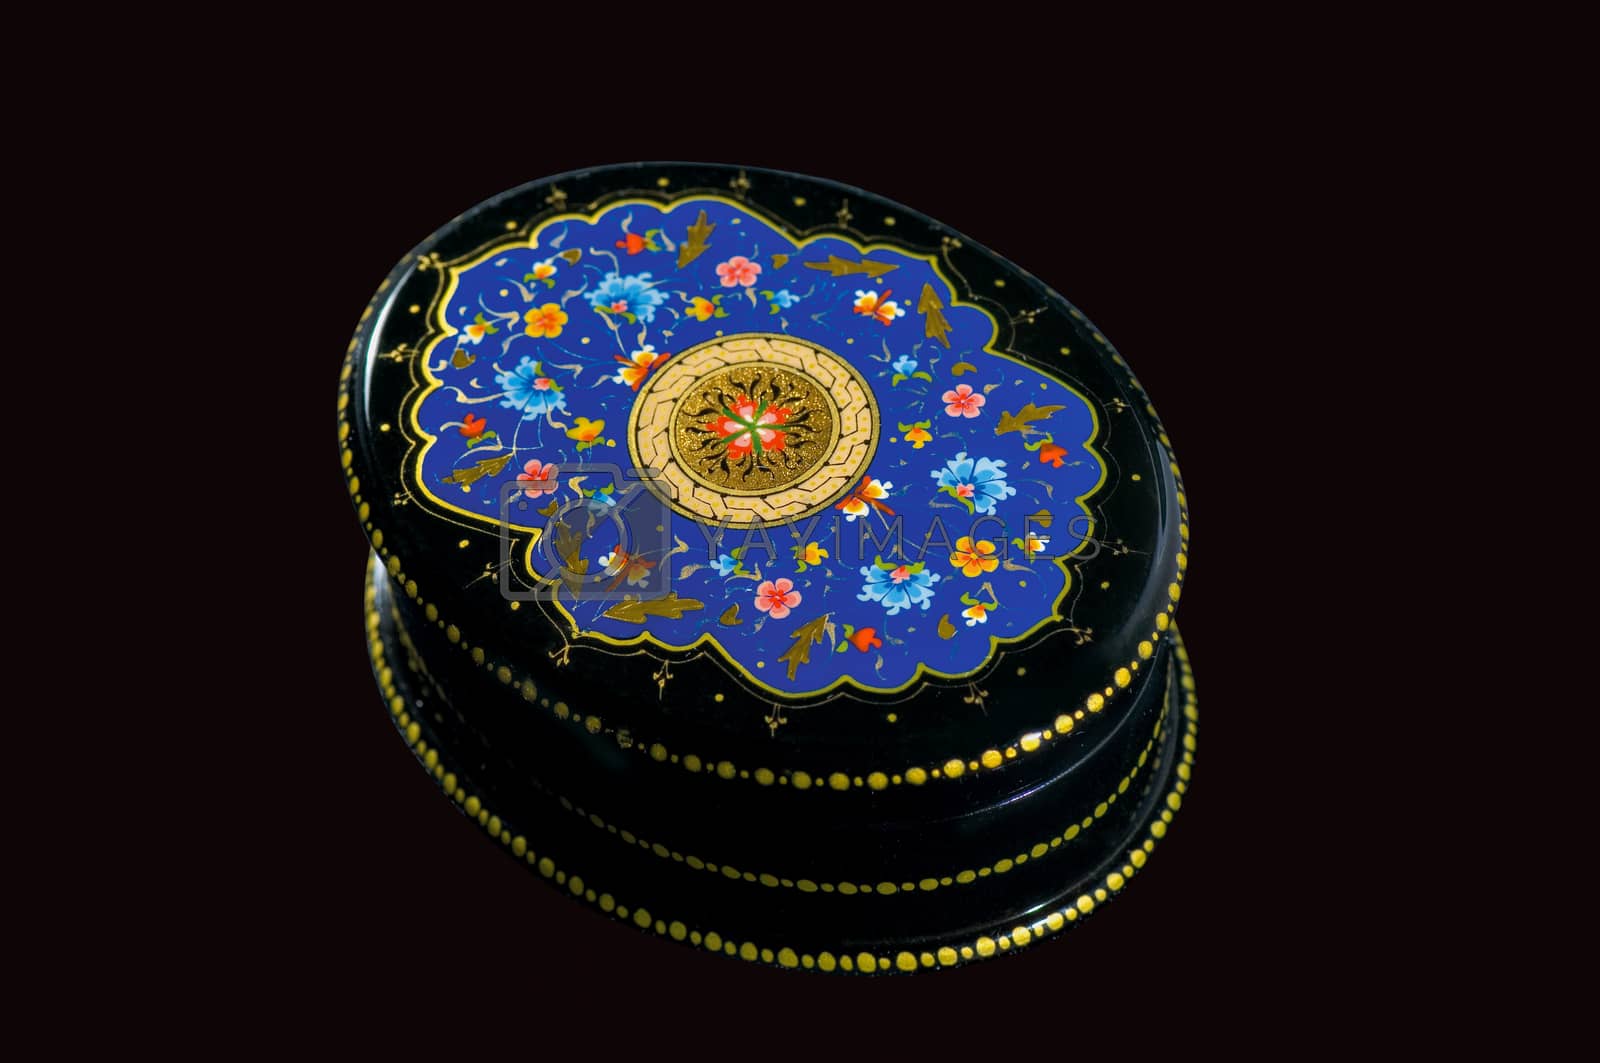 Royalty free image of oriental box on a black background by A_Karim